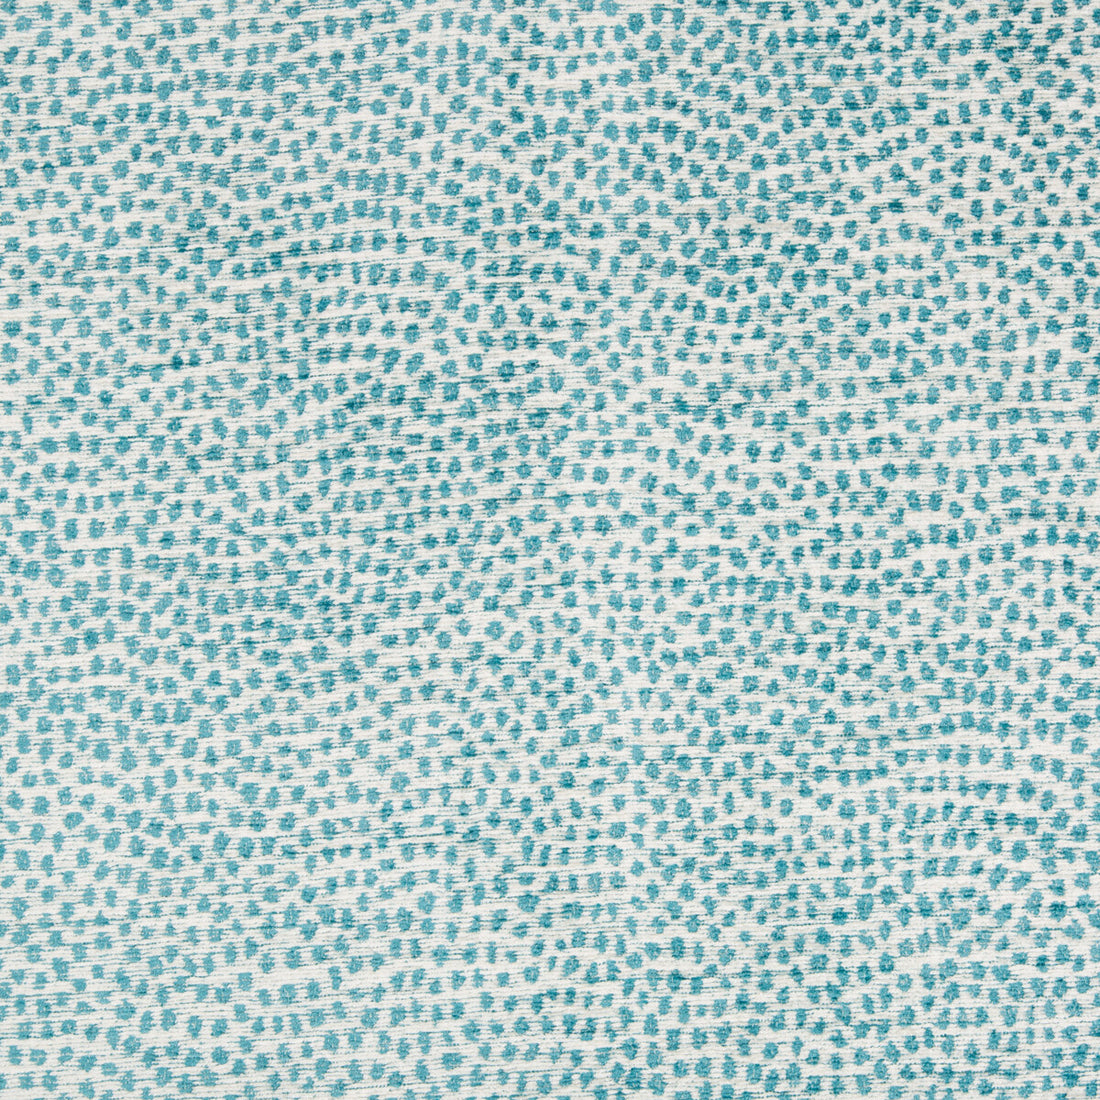 Kravet Design fabric in 34971-13 color - pattern 34971.13.0 - by Kravet Design in the Performance Crypton Home collection